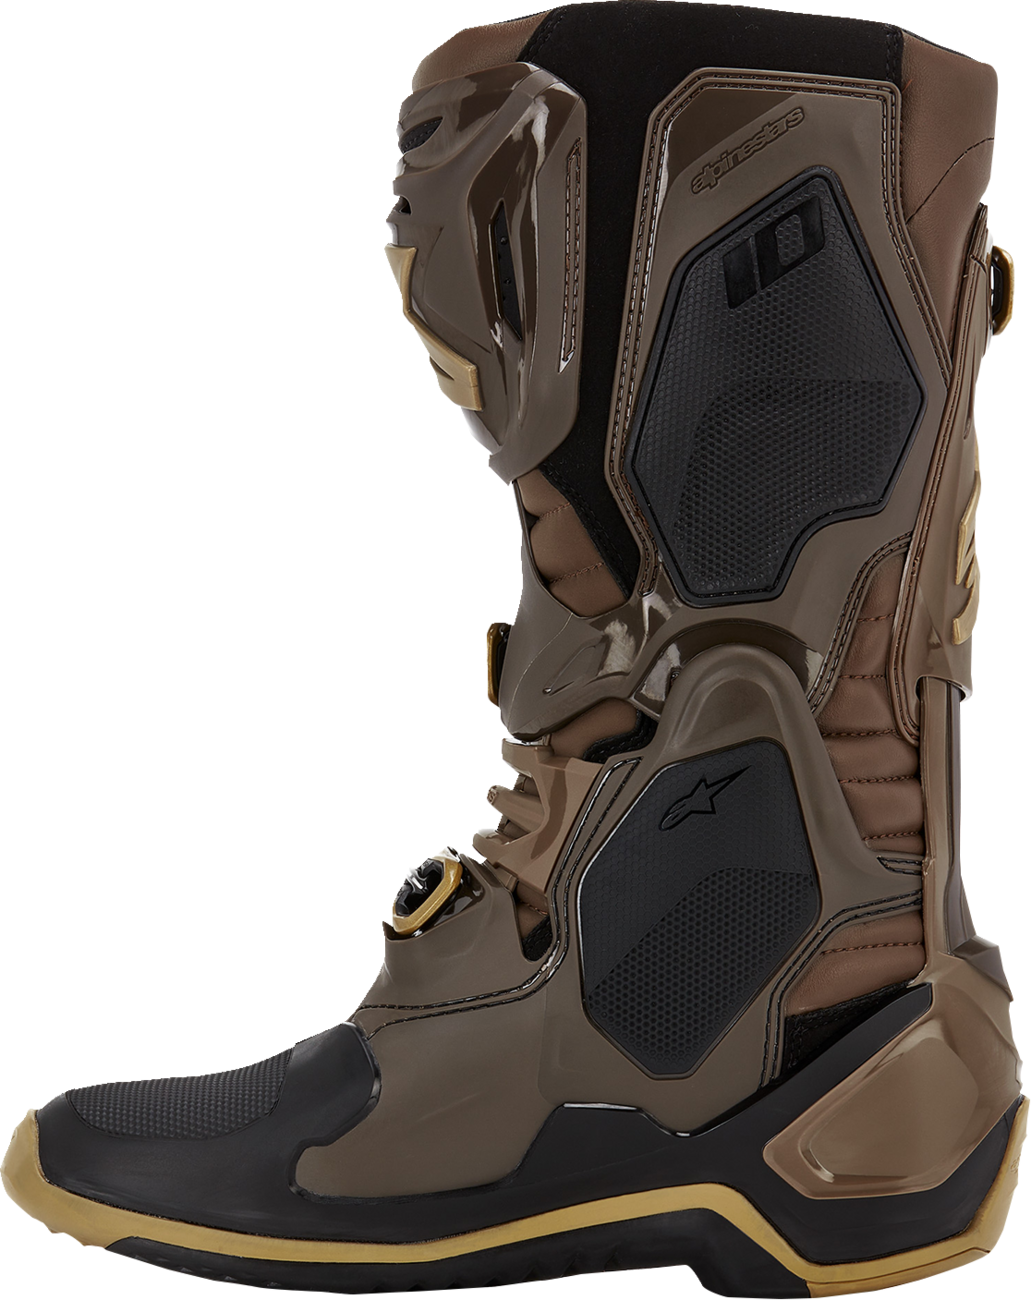 ALPINESTARS Limited Edition Squad '23 Tech 10 Boots - Brown/Gold - US 12 2010020-839-12